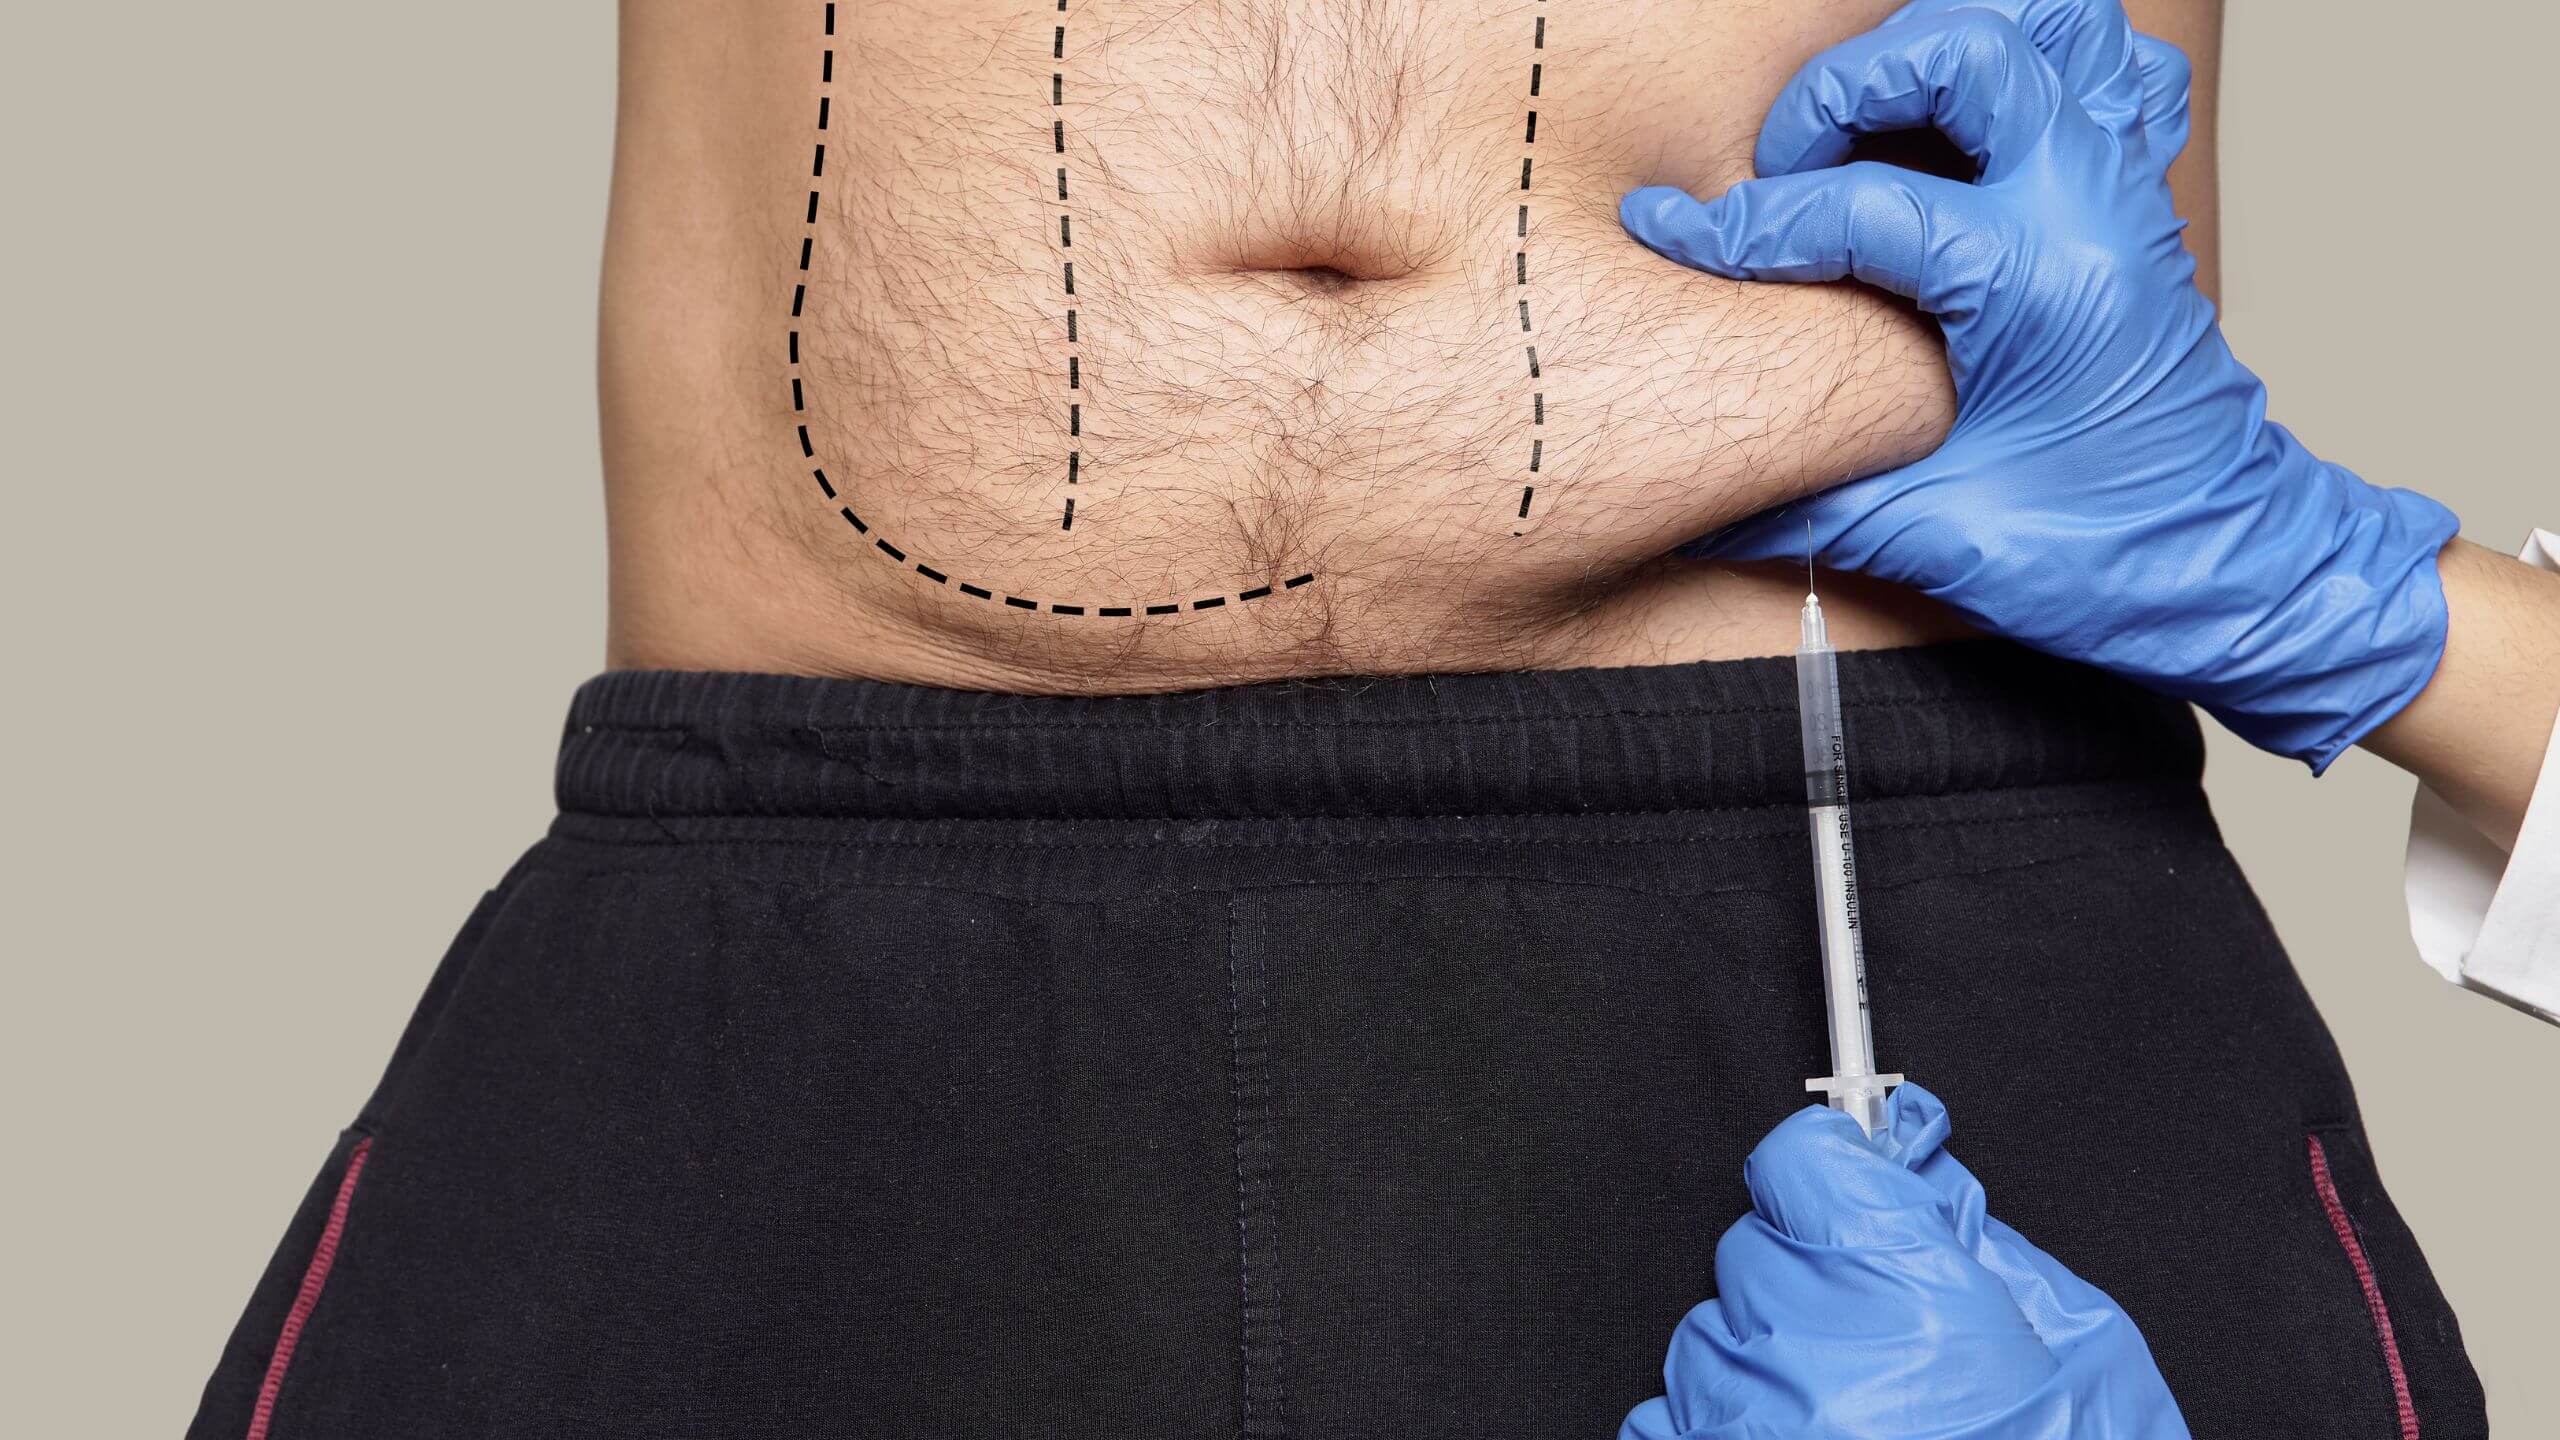 Fat Dissolving Injections